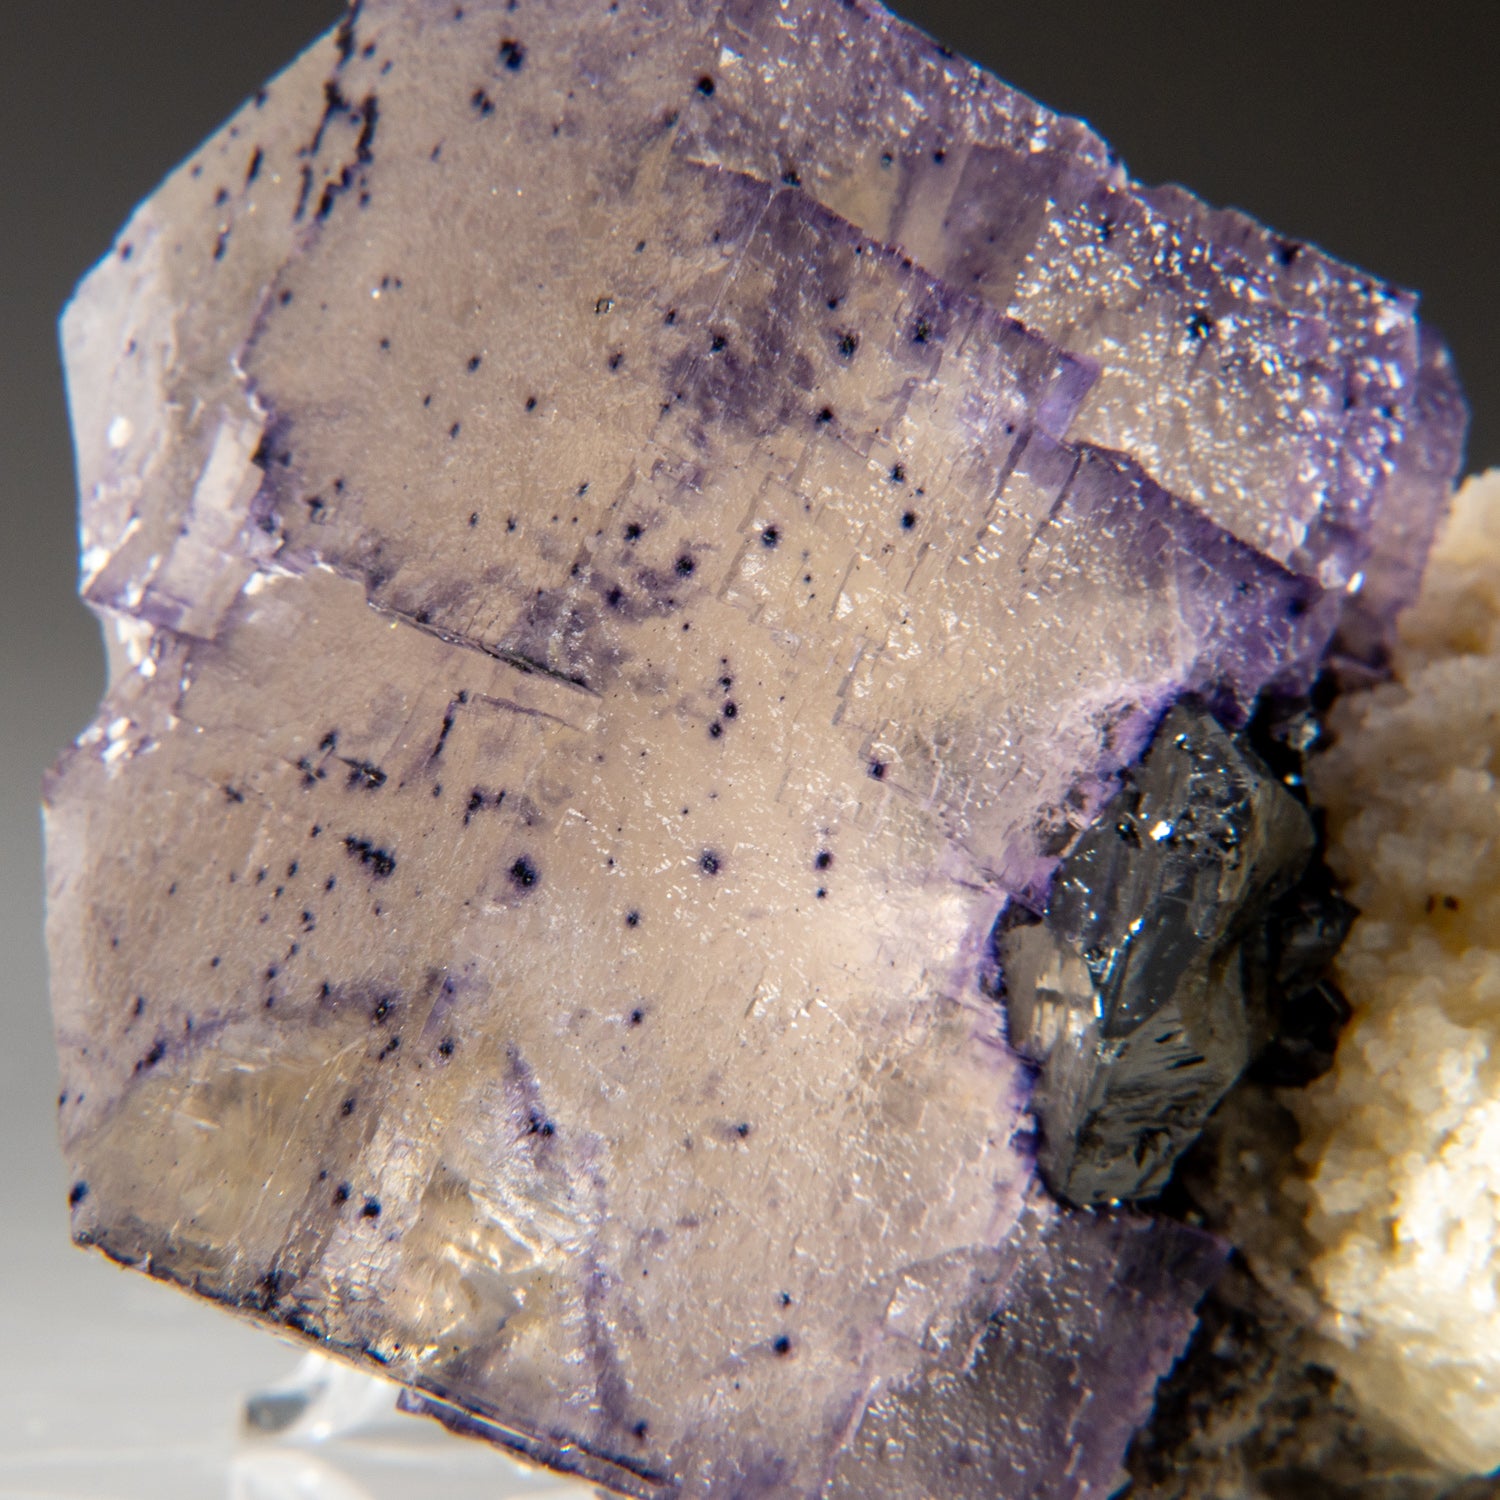 Fluorite with Barite from Elmwood Mine, Carthage. Smith County, Tennessee